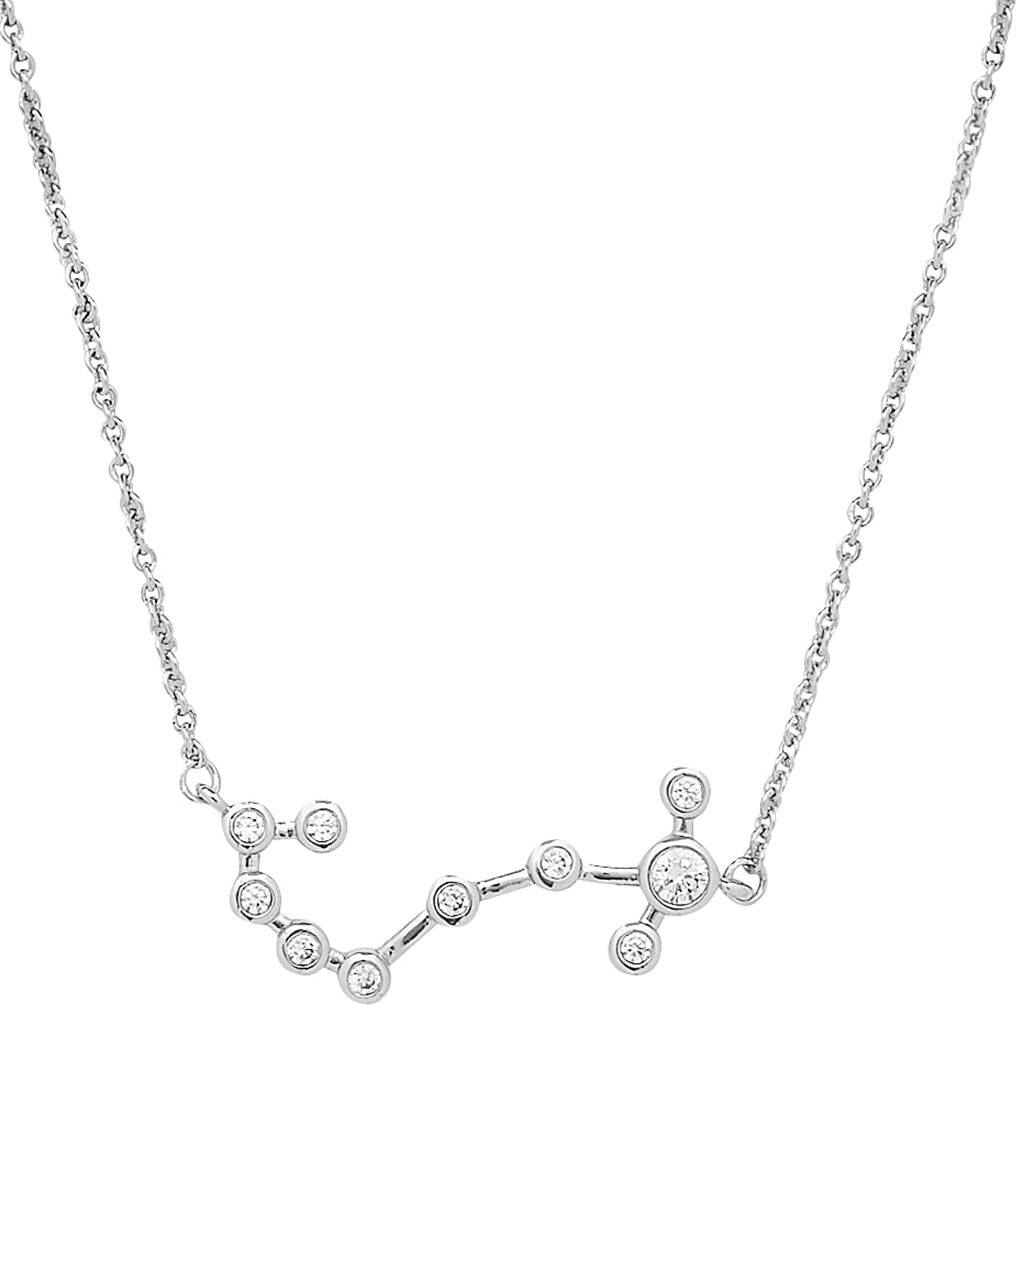 'When Stars Align' Constellation Necklace Necklace Sterling Forever Silver Scorpio (Oct 23 - Nov 21) 